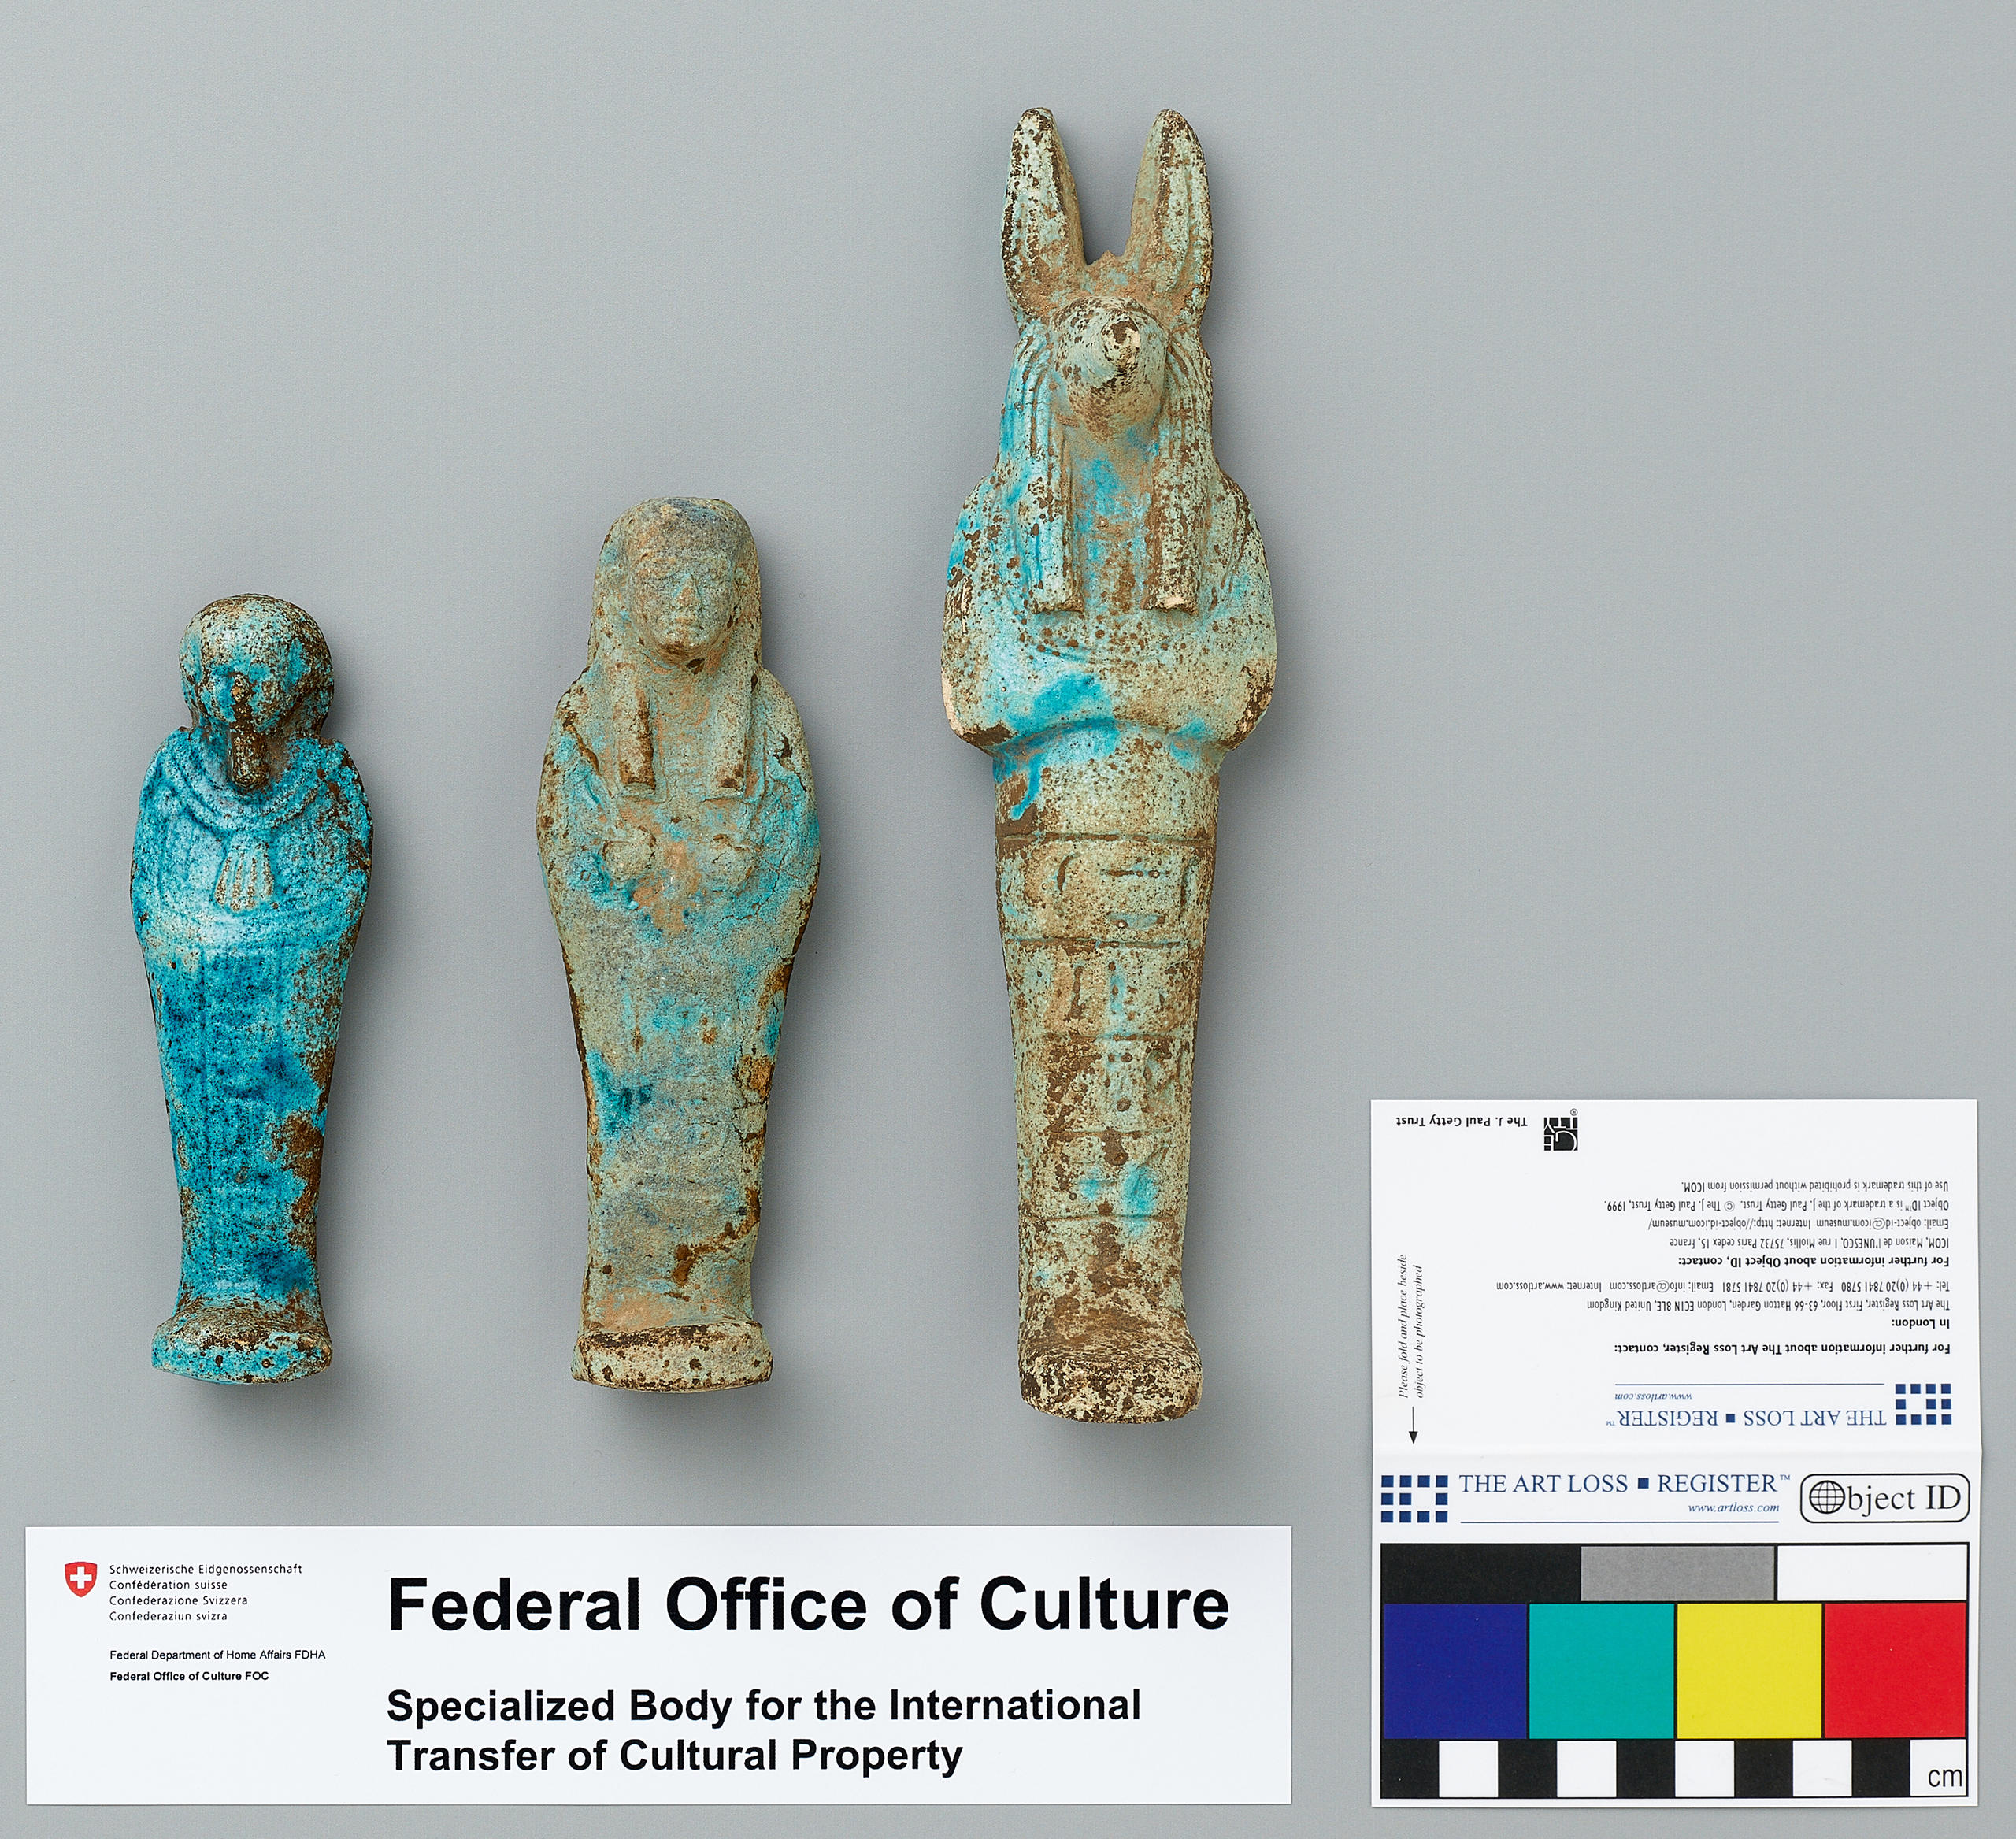 Three ancient Egyptian statuettes that were handed back to Egypt by Swiss officials last week